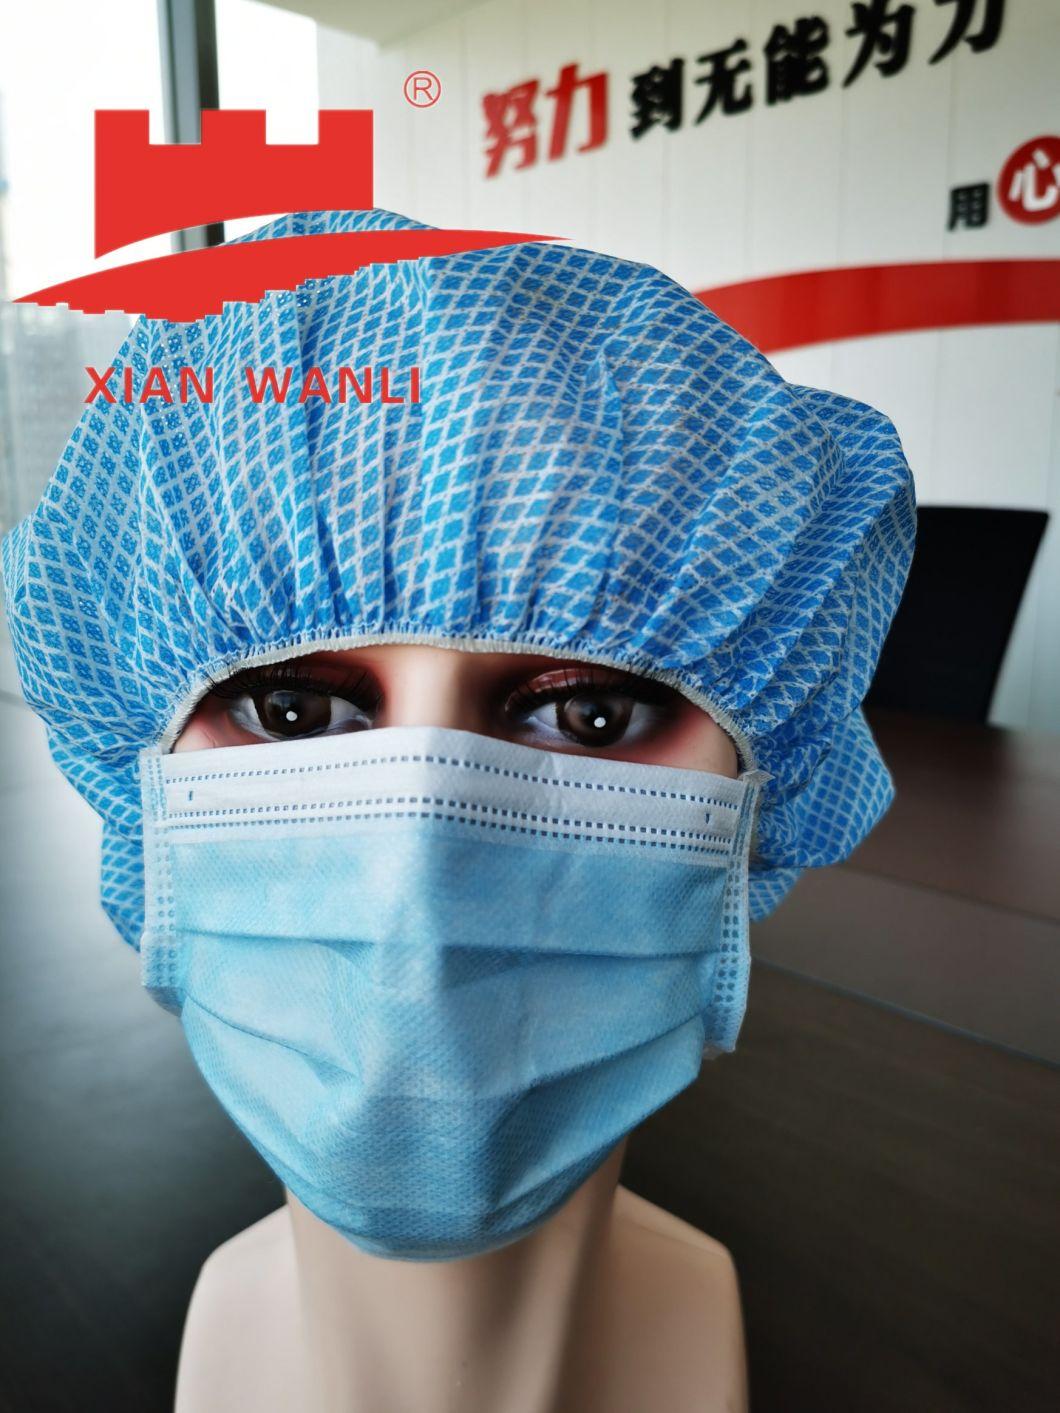 Doctor Caps Cap with Tie Back, Surgical Cap, Disposable Surgical Cap, Hospital Nonwoven Surgical Caps, Disposable Surgeon Caps,